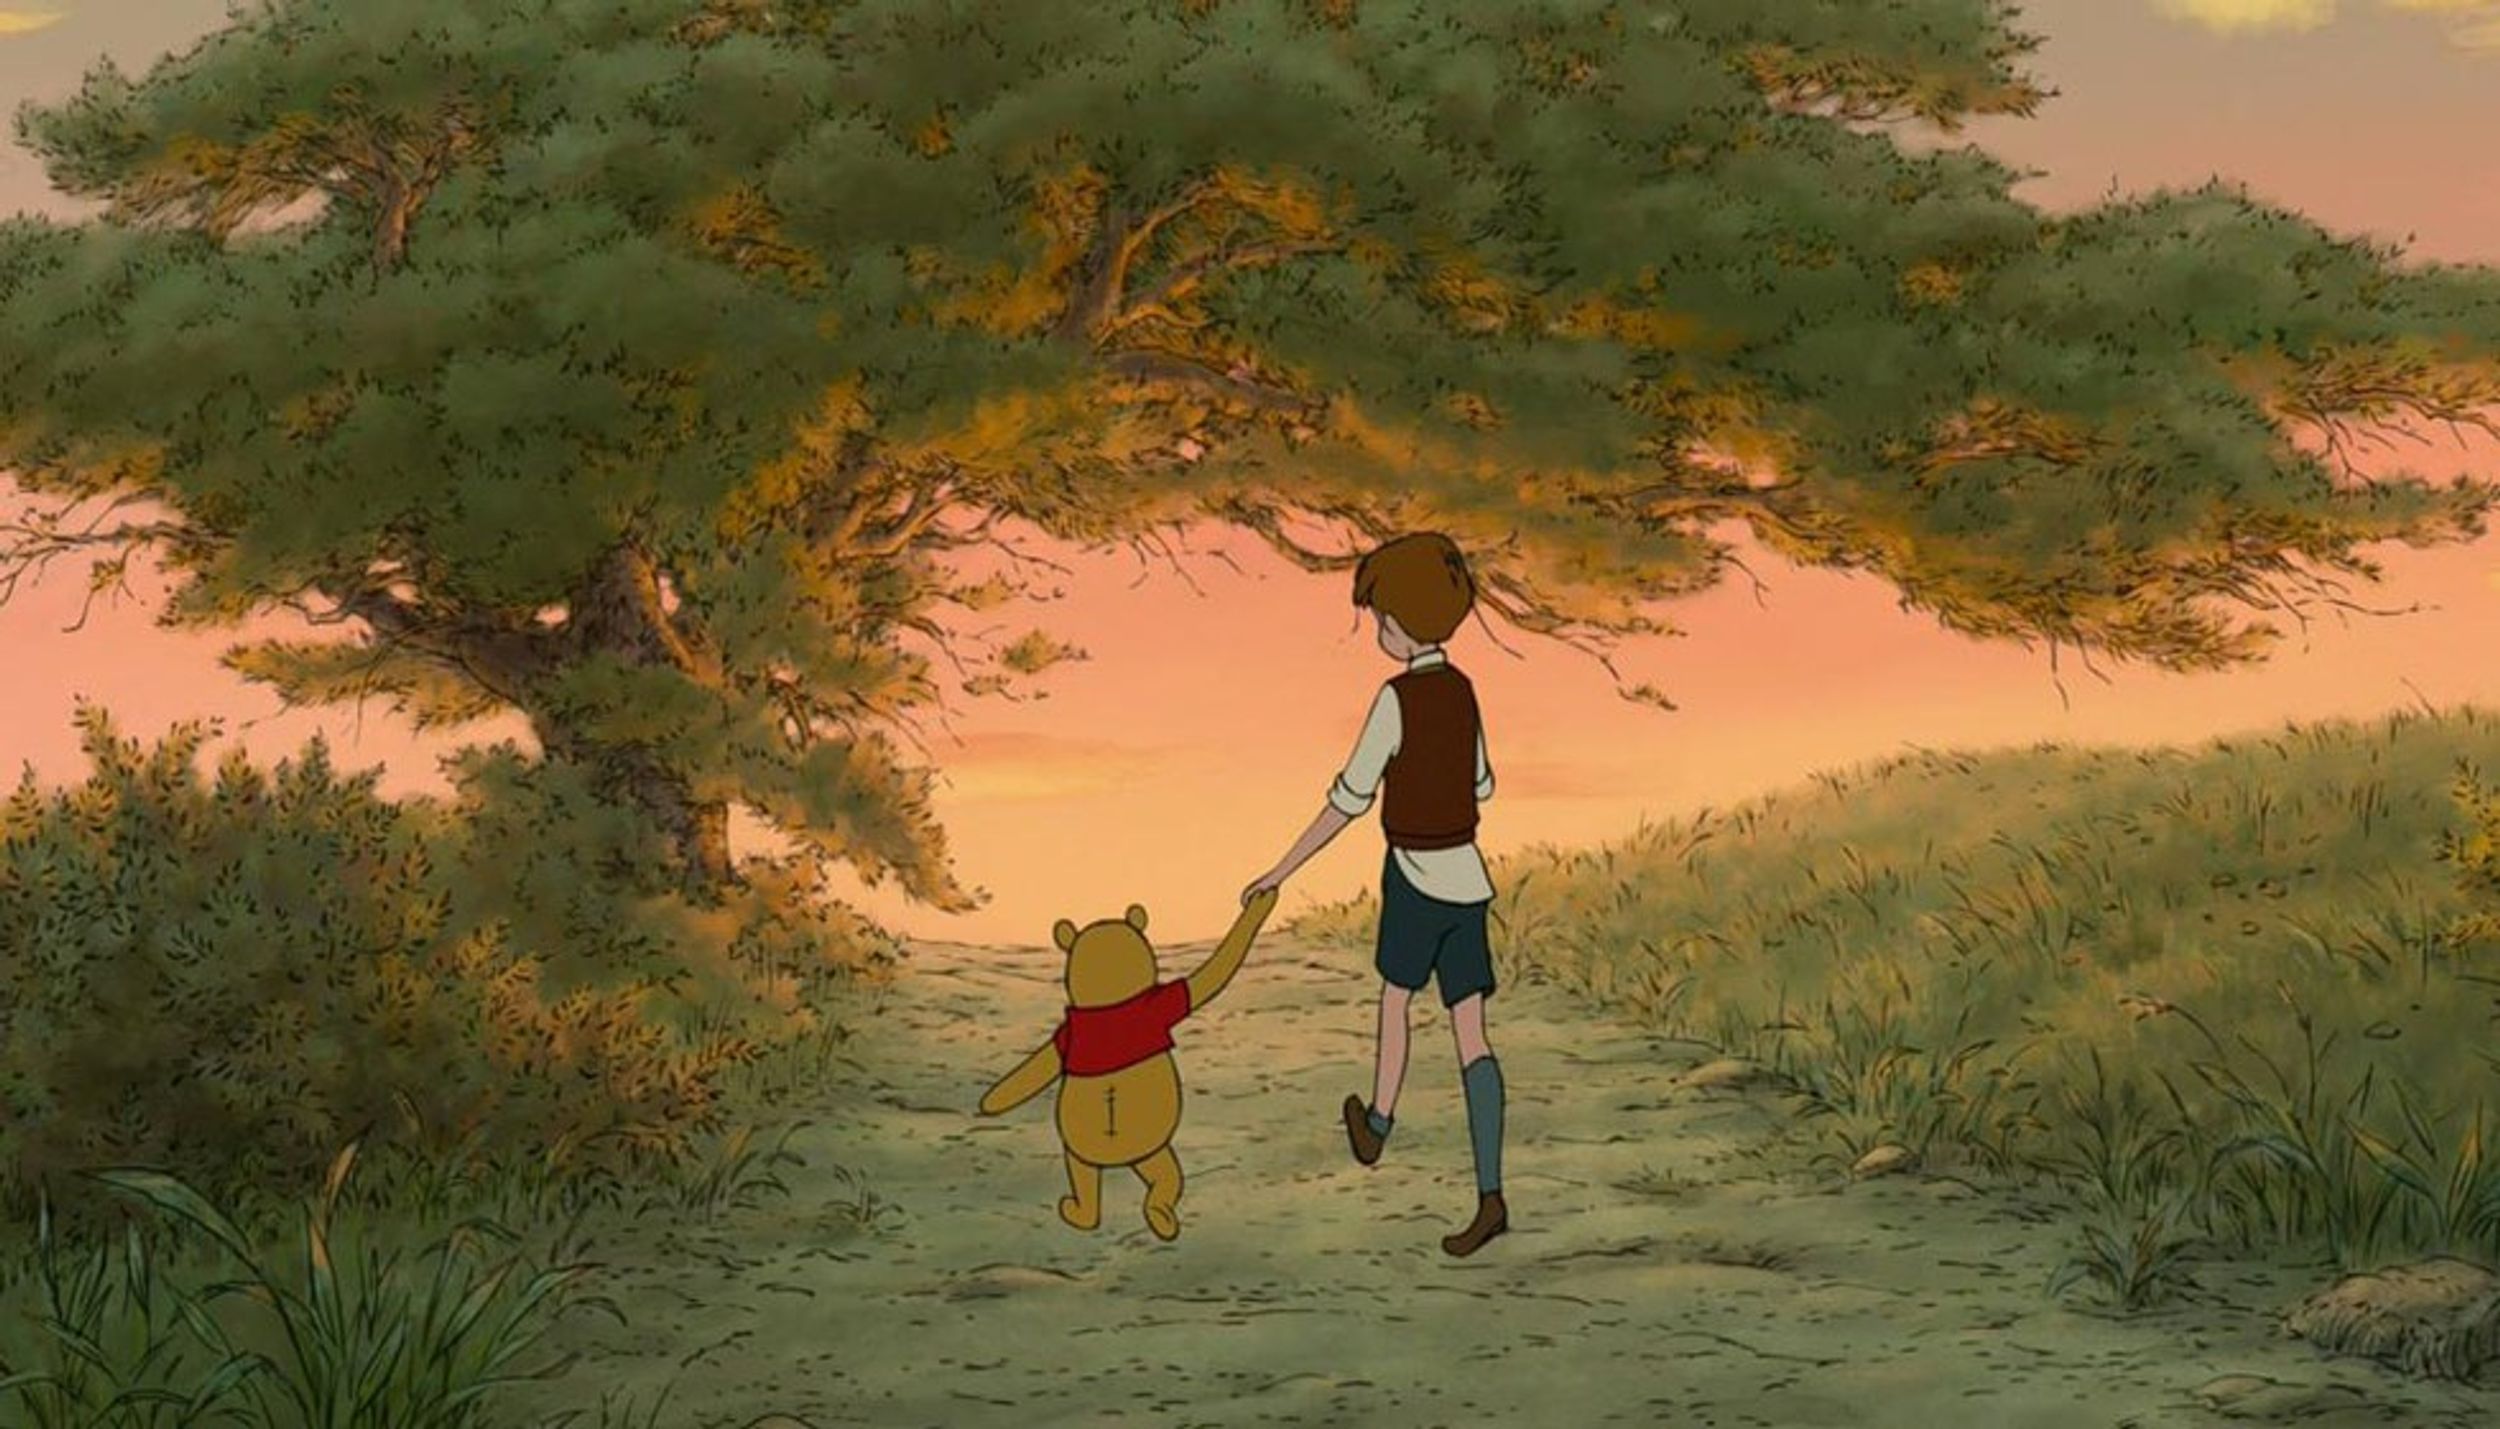 "Winnie The Pooh" Quotes To Live By